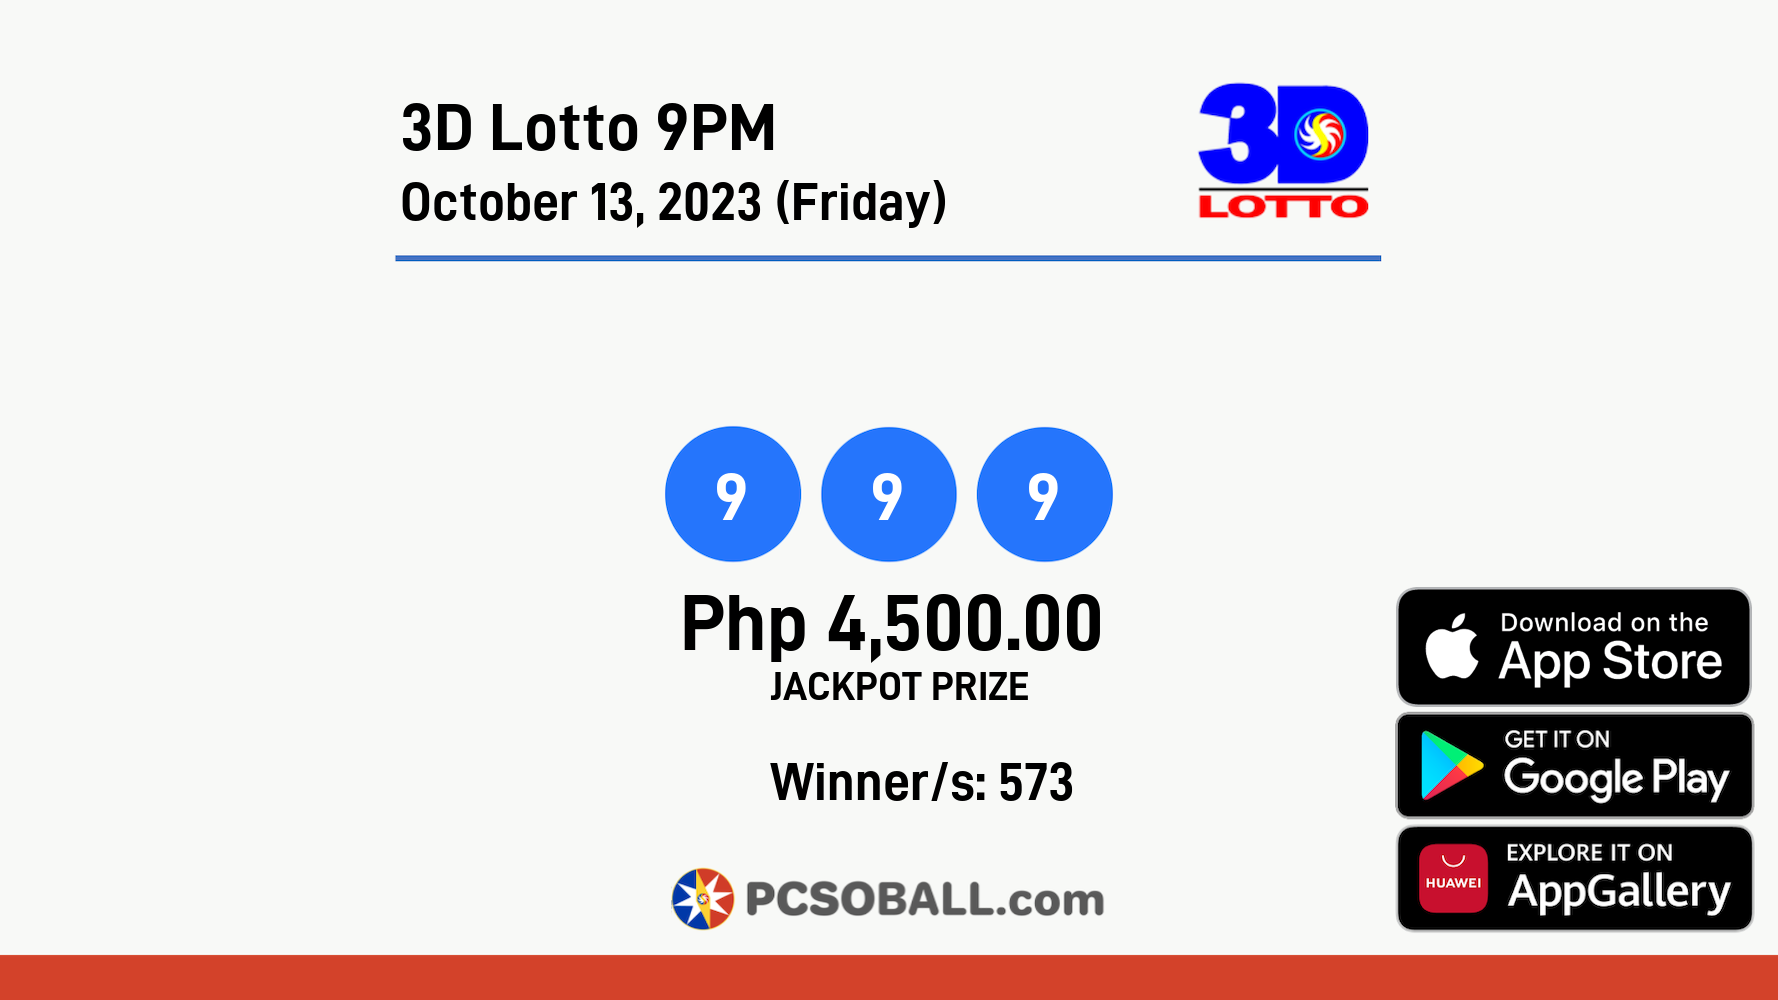 3D Lotto 9PM October 13, 2023 (Friday) Result